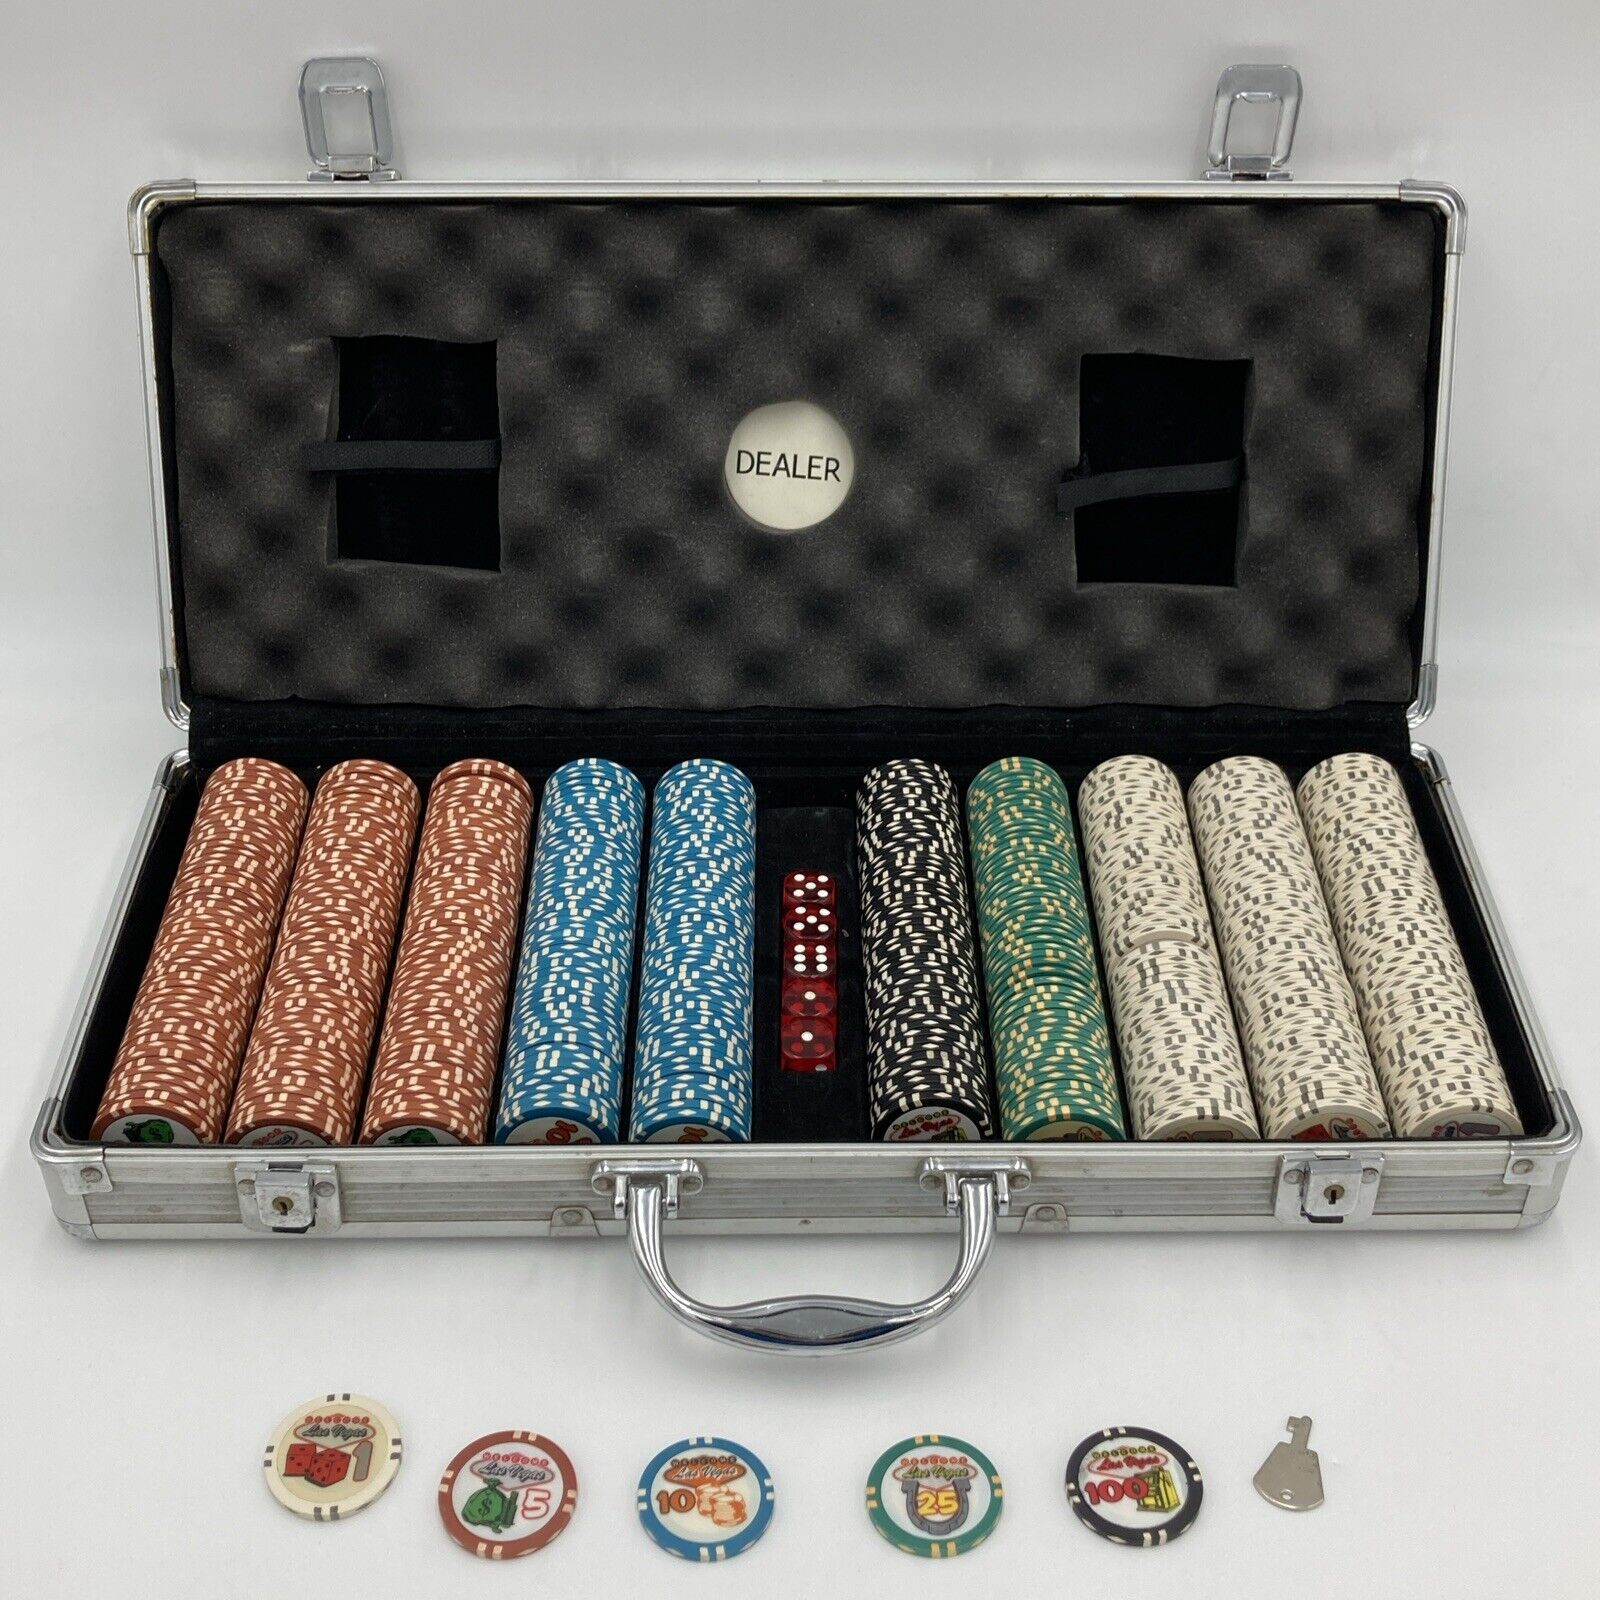 Welcome To Las Vegas Poker Chips 500 pieces Metal Case & Key..$1,5,10,25,100